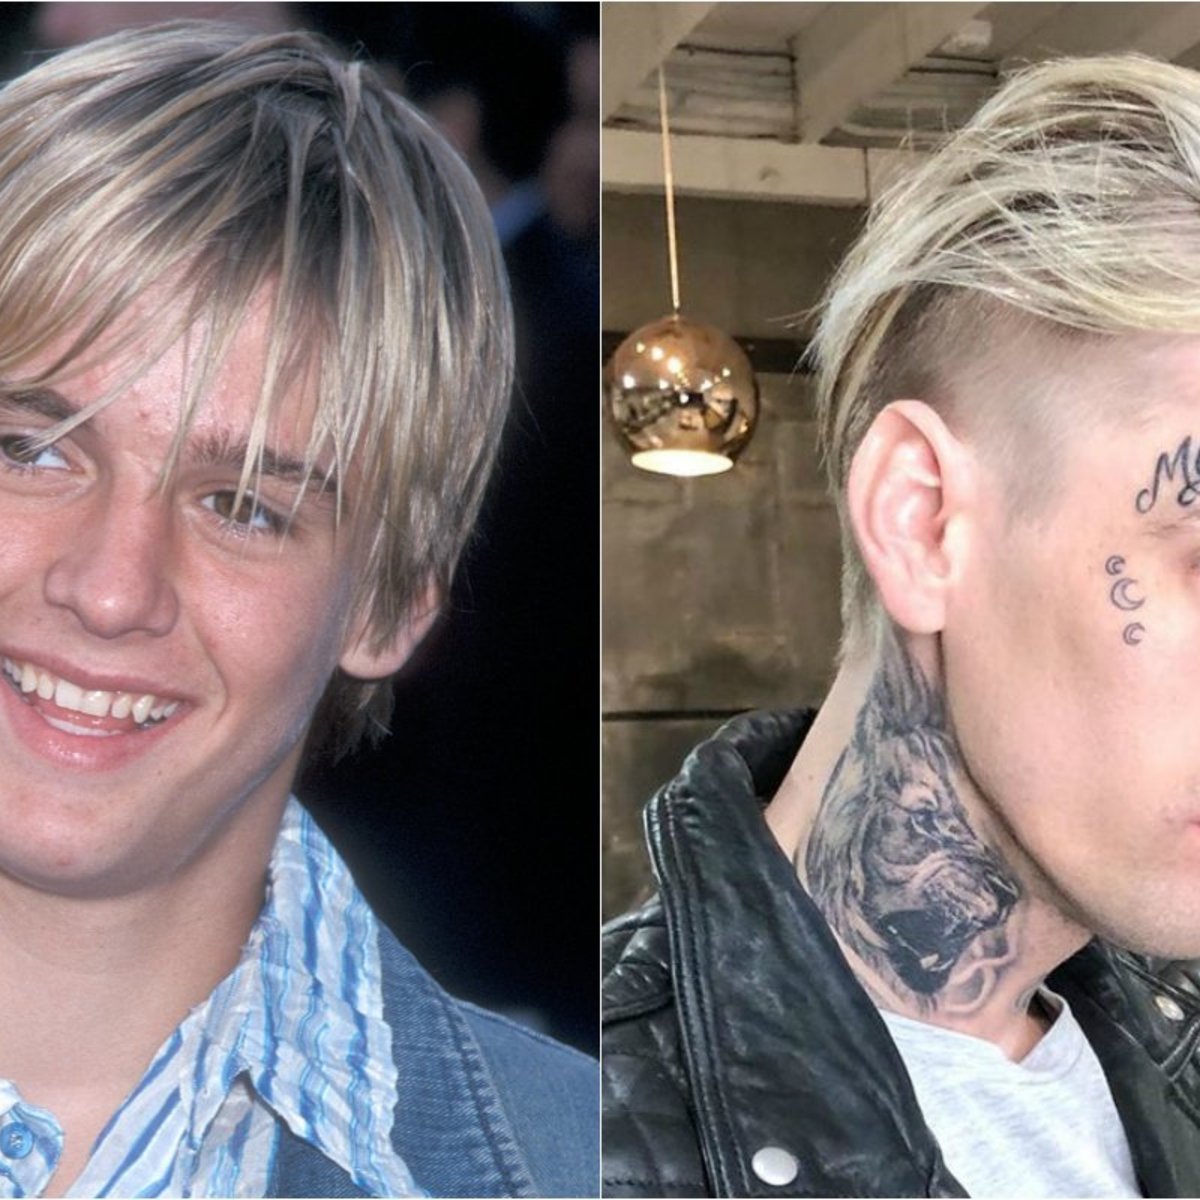 Aaron carter have hiv